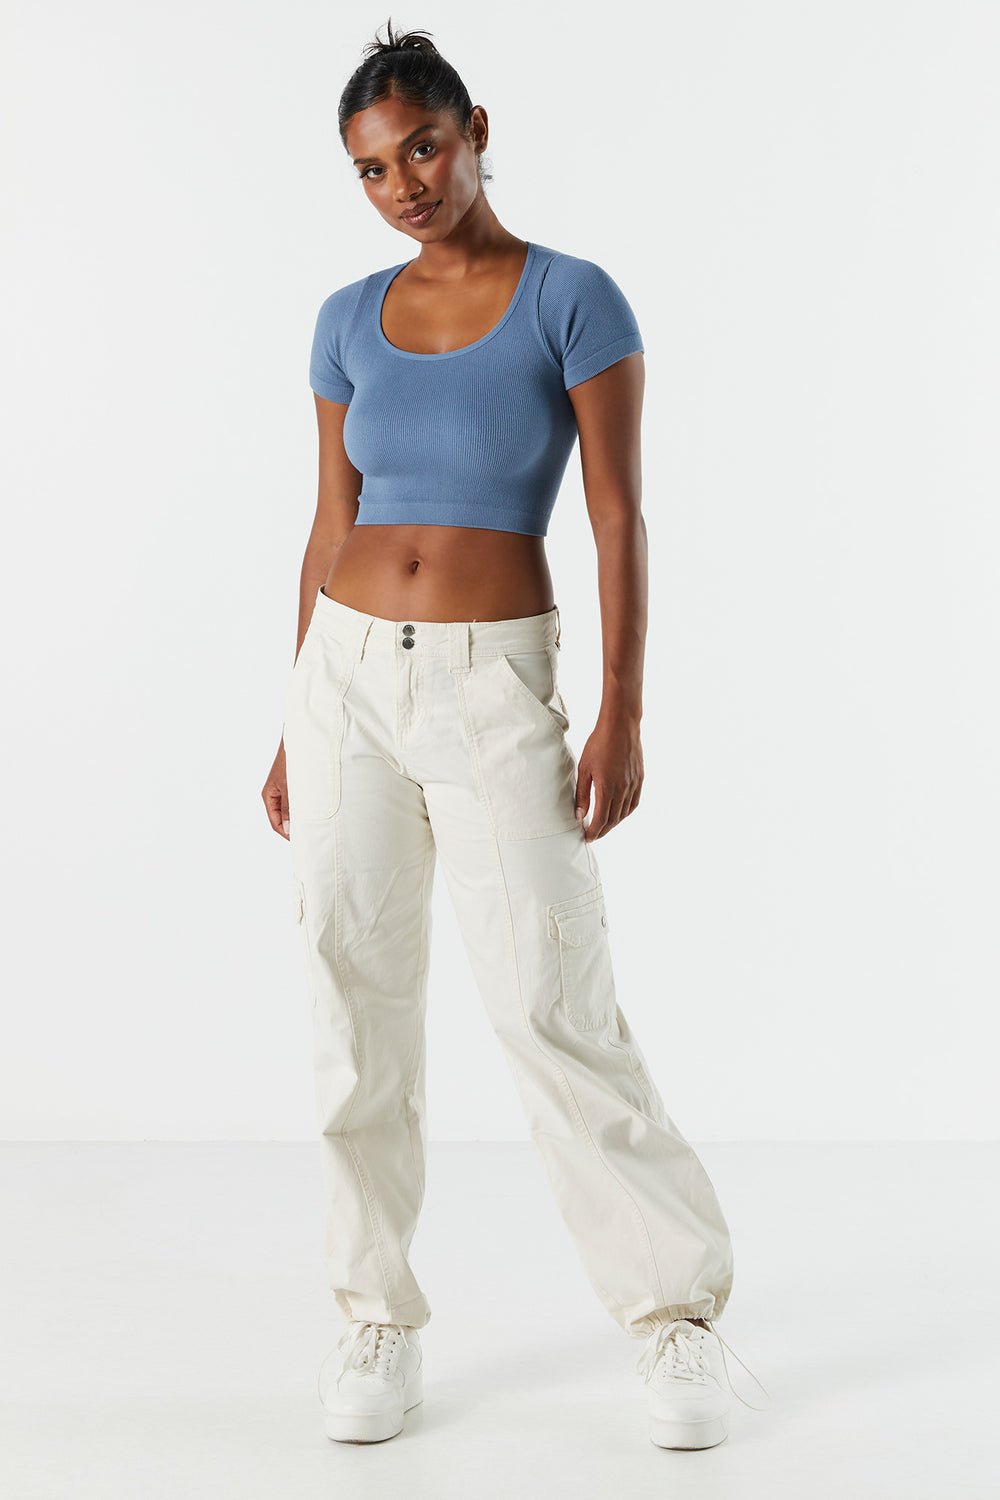 Seamless Ribbed Round Neck Cropped T-Shirt Seamless Ribbed Round Neck Cropped T-Shirt 12